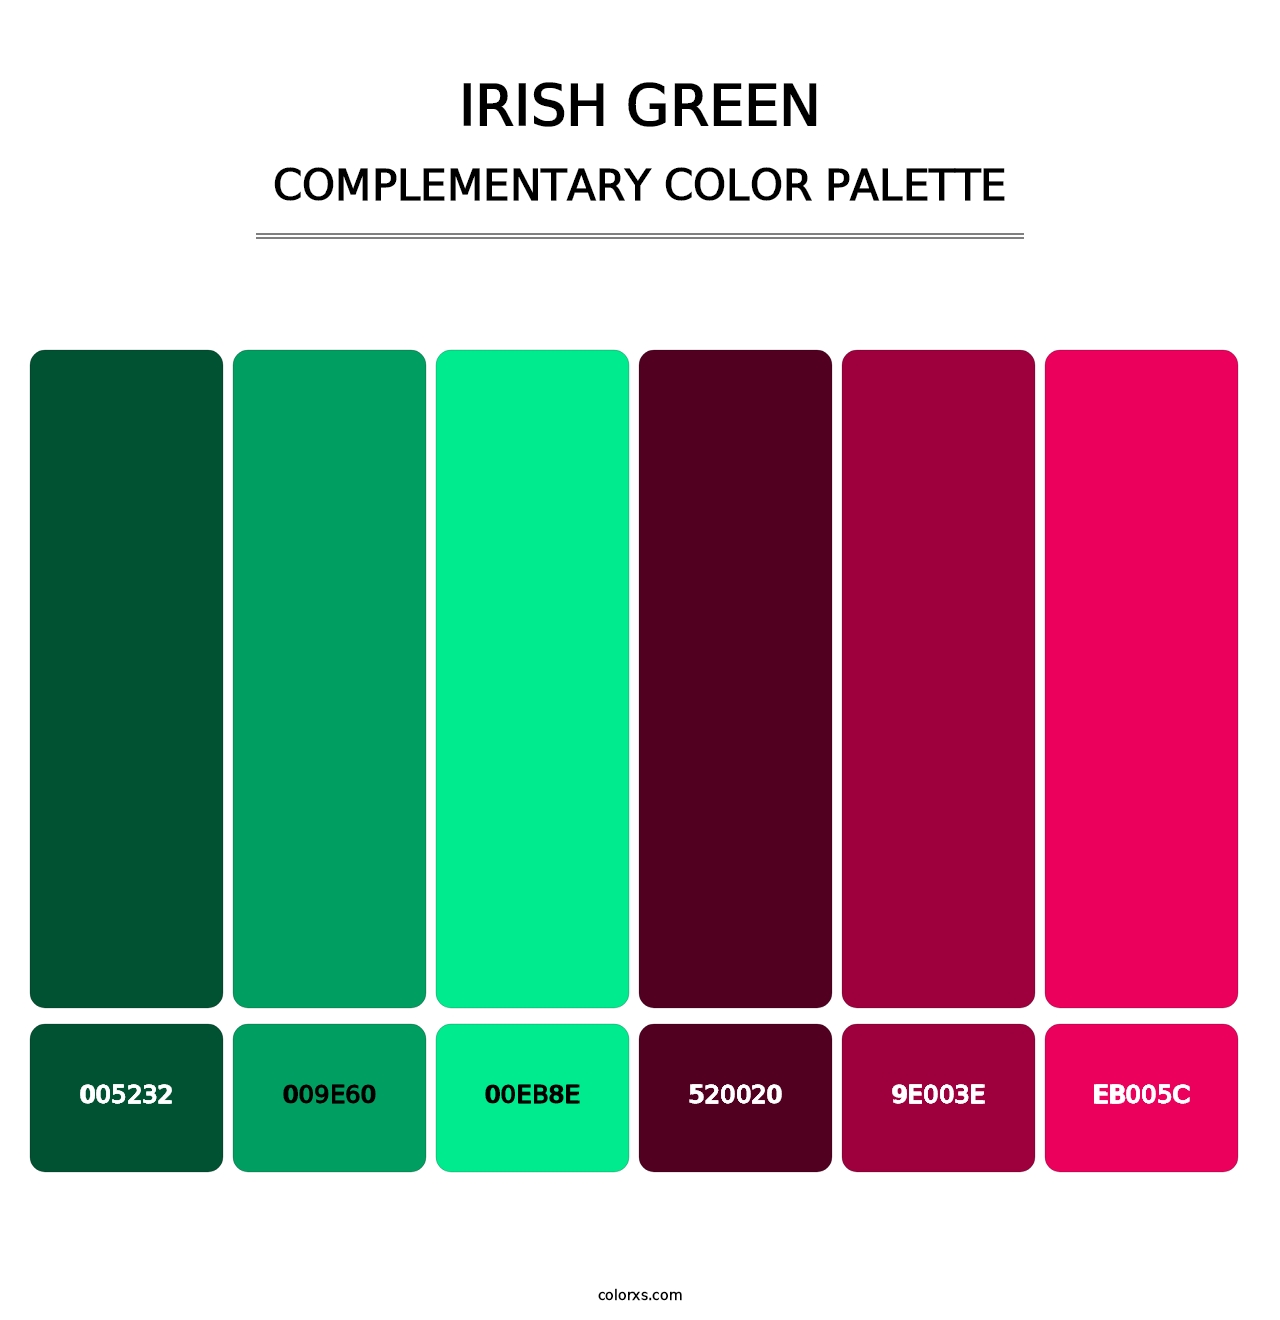 Irish Green - Complementary Color Palette